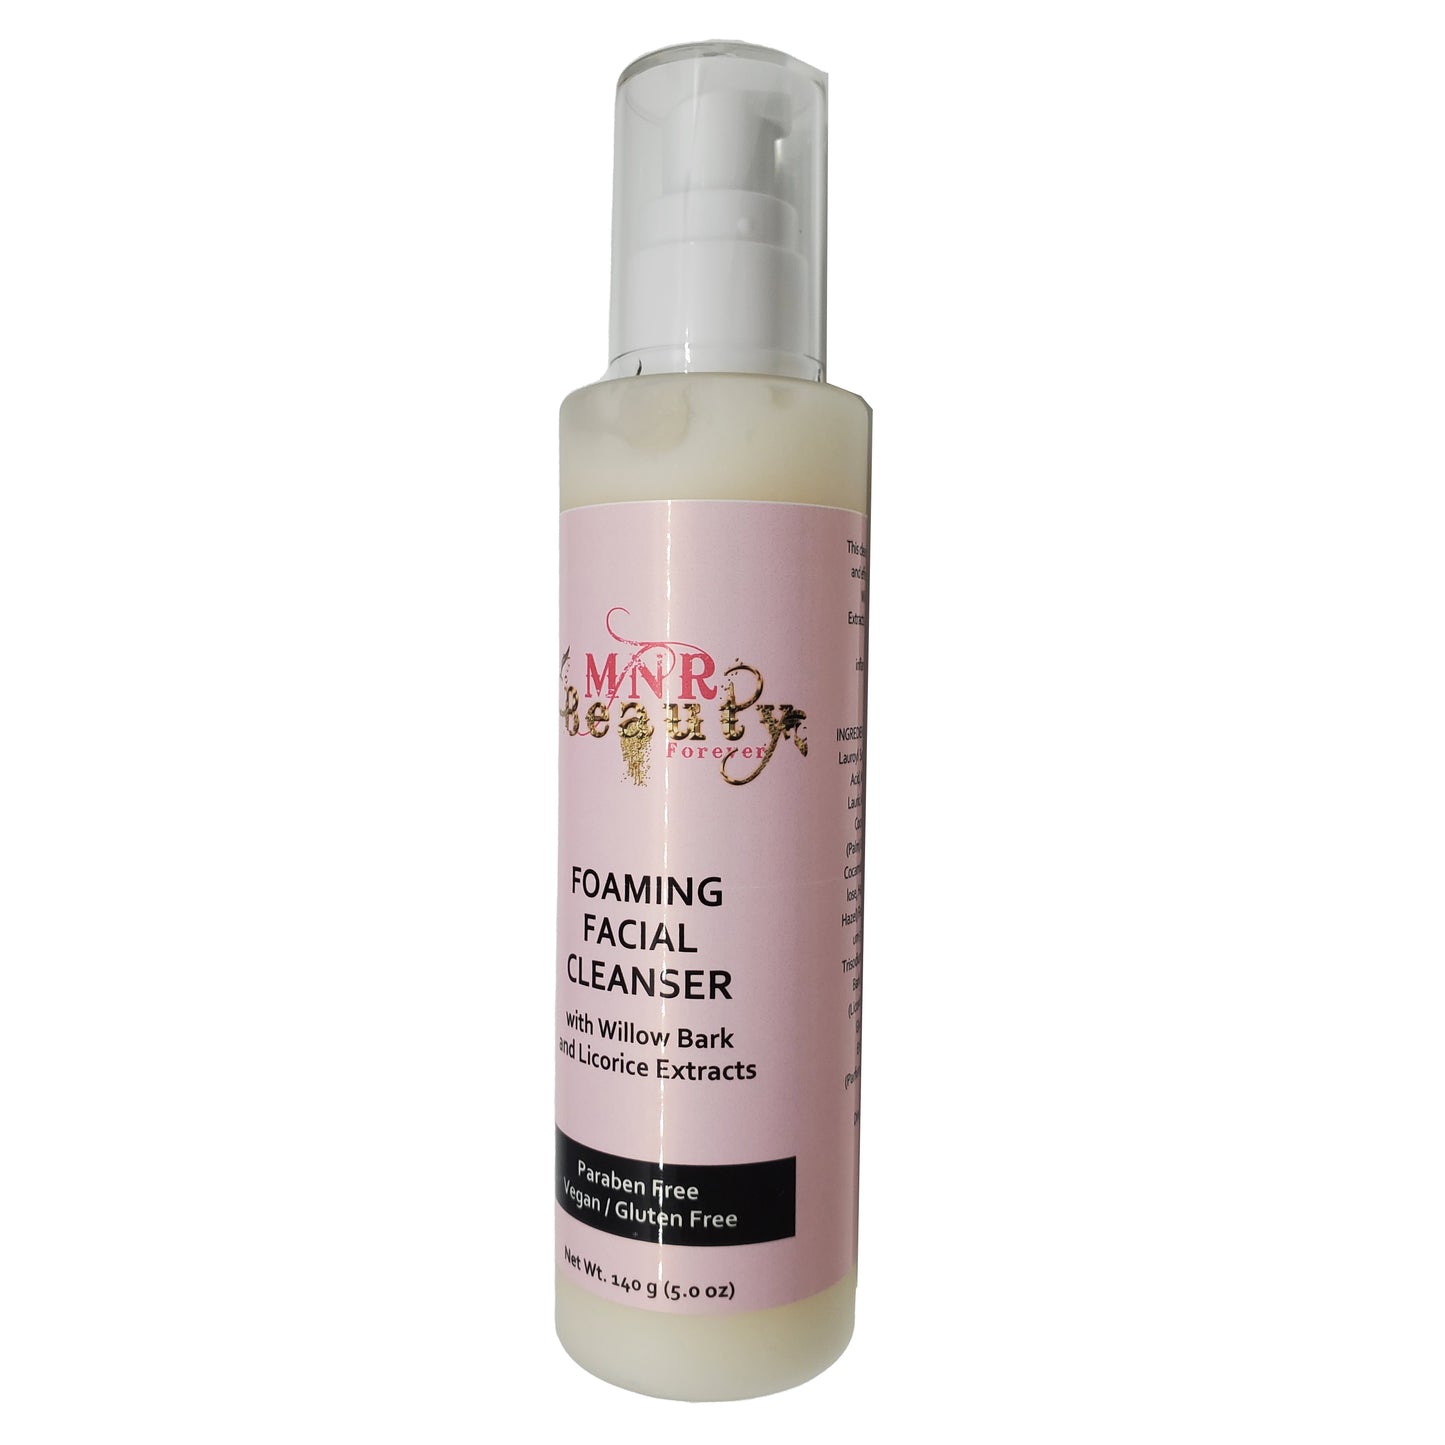 FOAMING FACIAL CLEANSER